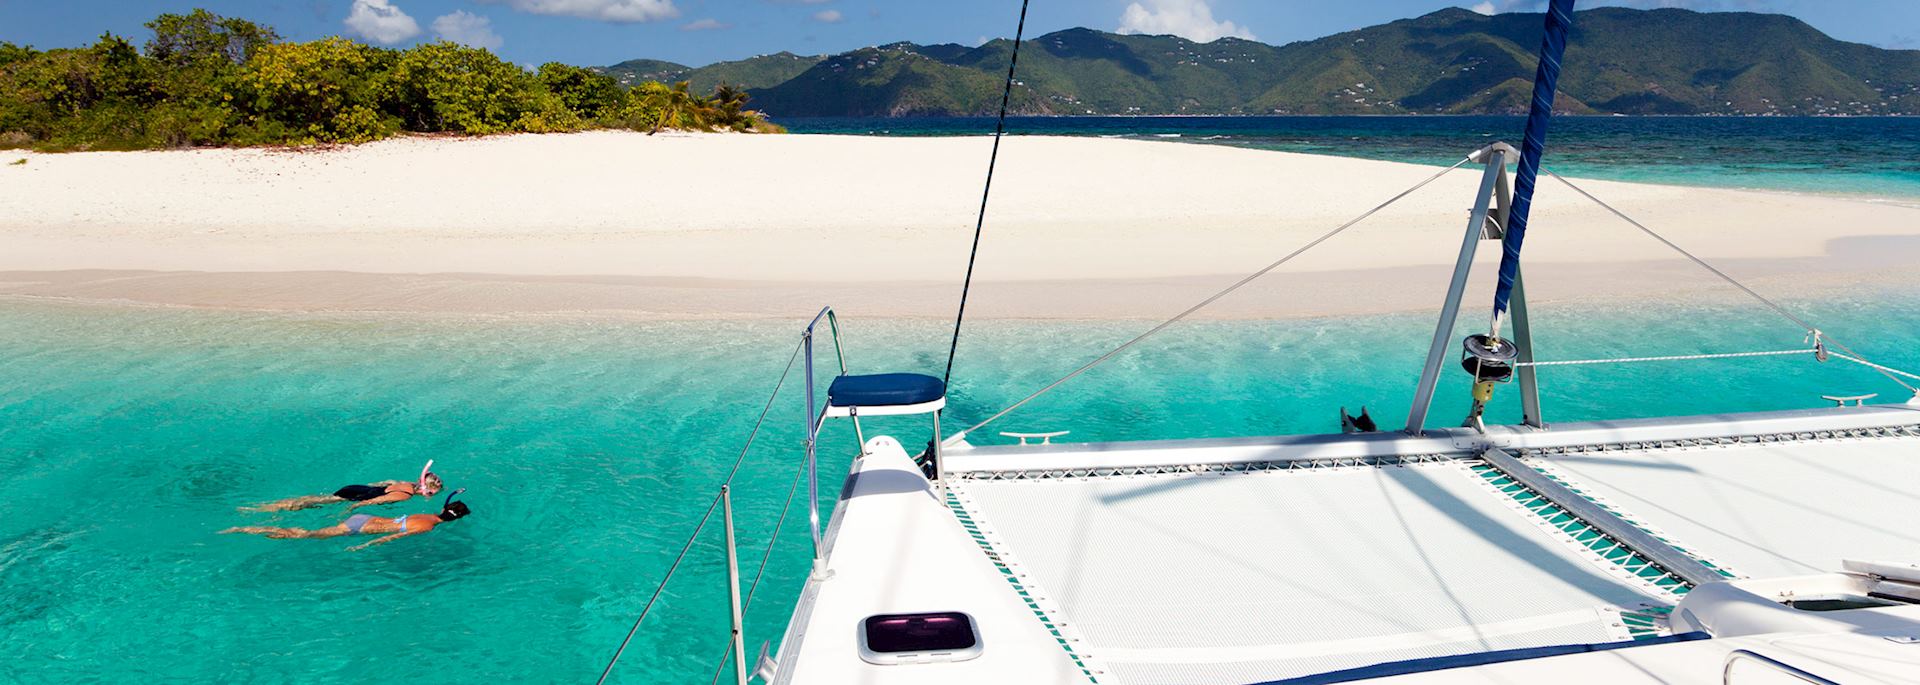 Explore the British Virgin Islands on a privately crewed yacht